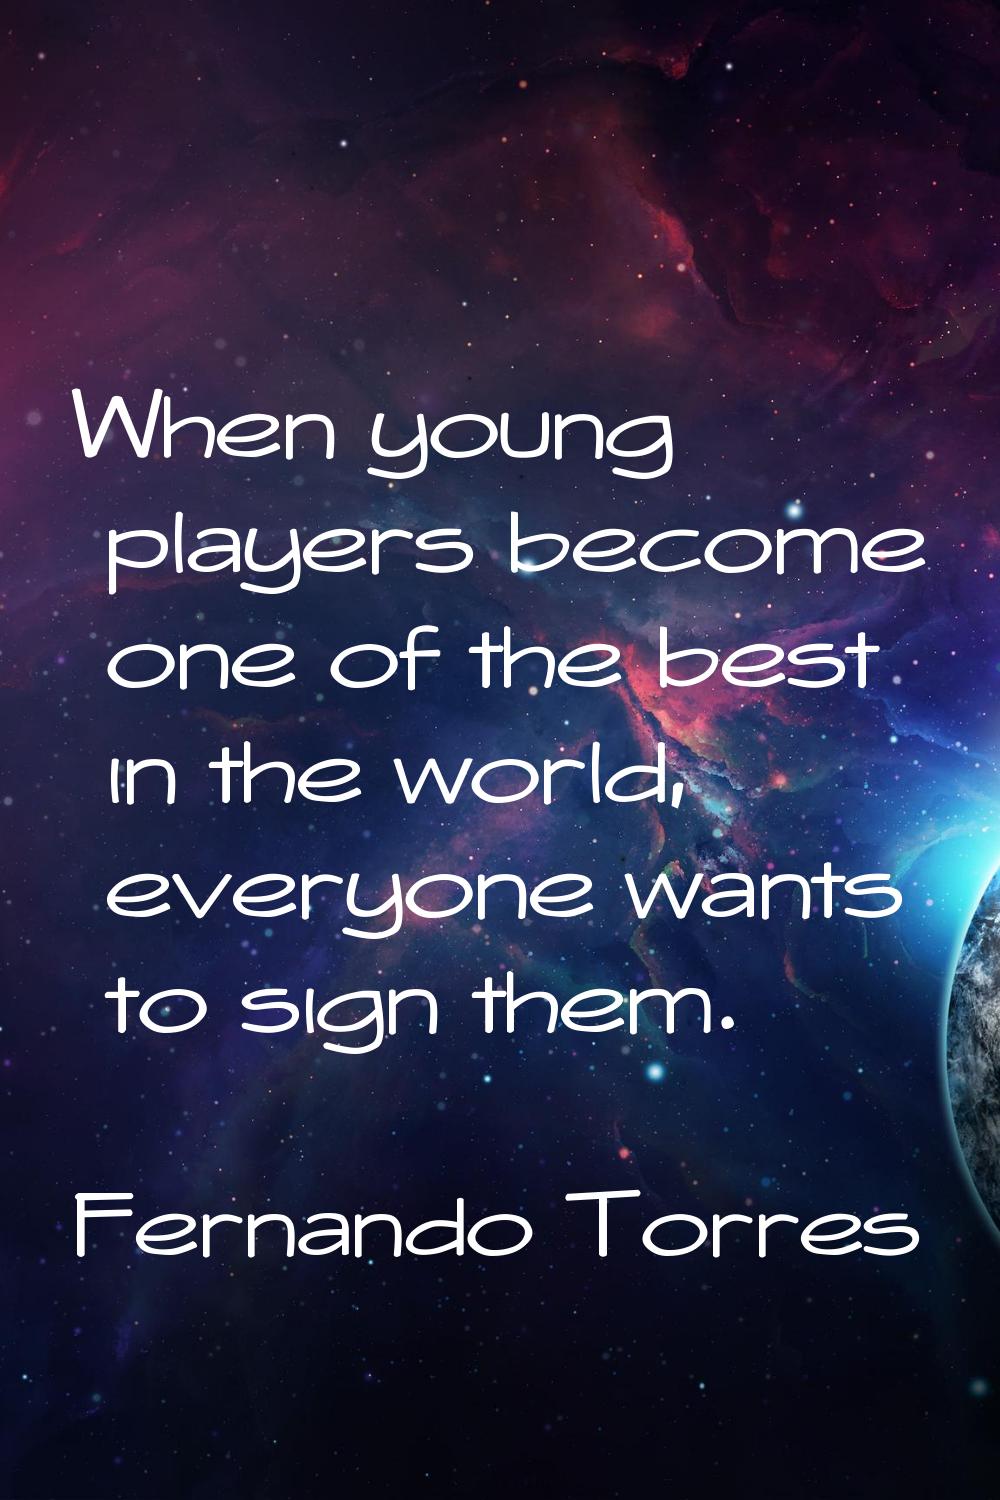 When young players become one of the best in the world, everyone wants to sign them.